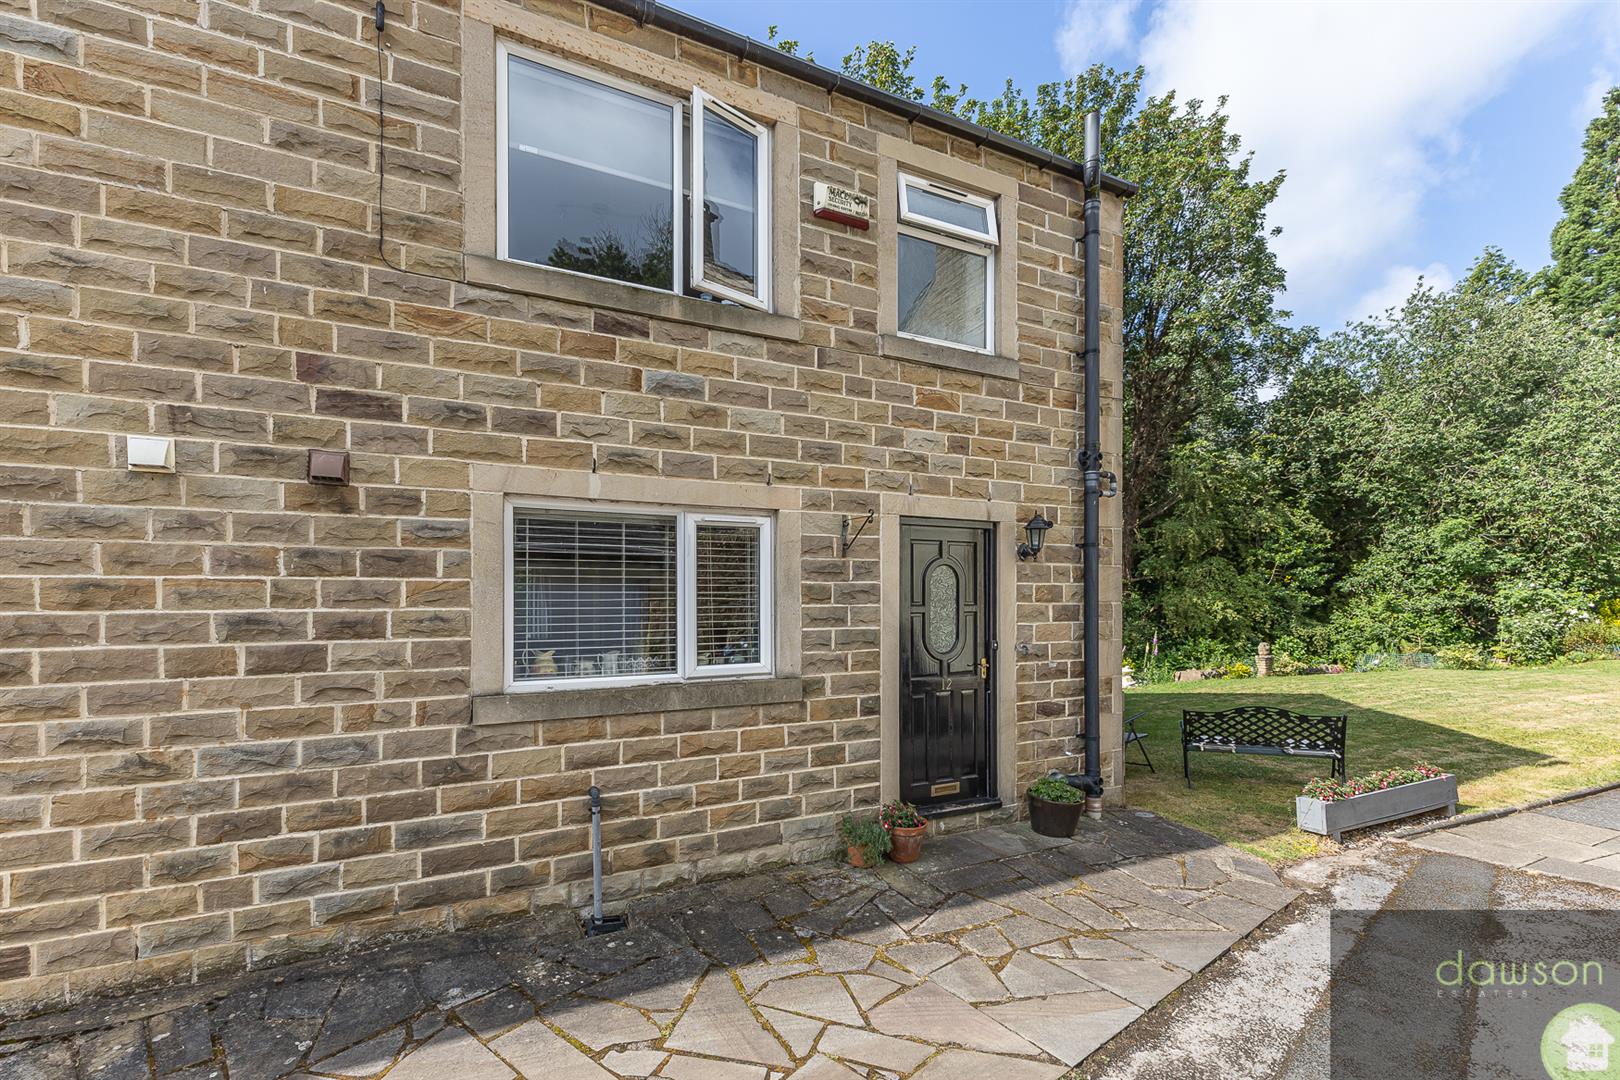 4 bed semi-detached house for sale in Hoults Lane, Halifax, HX4 